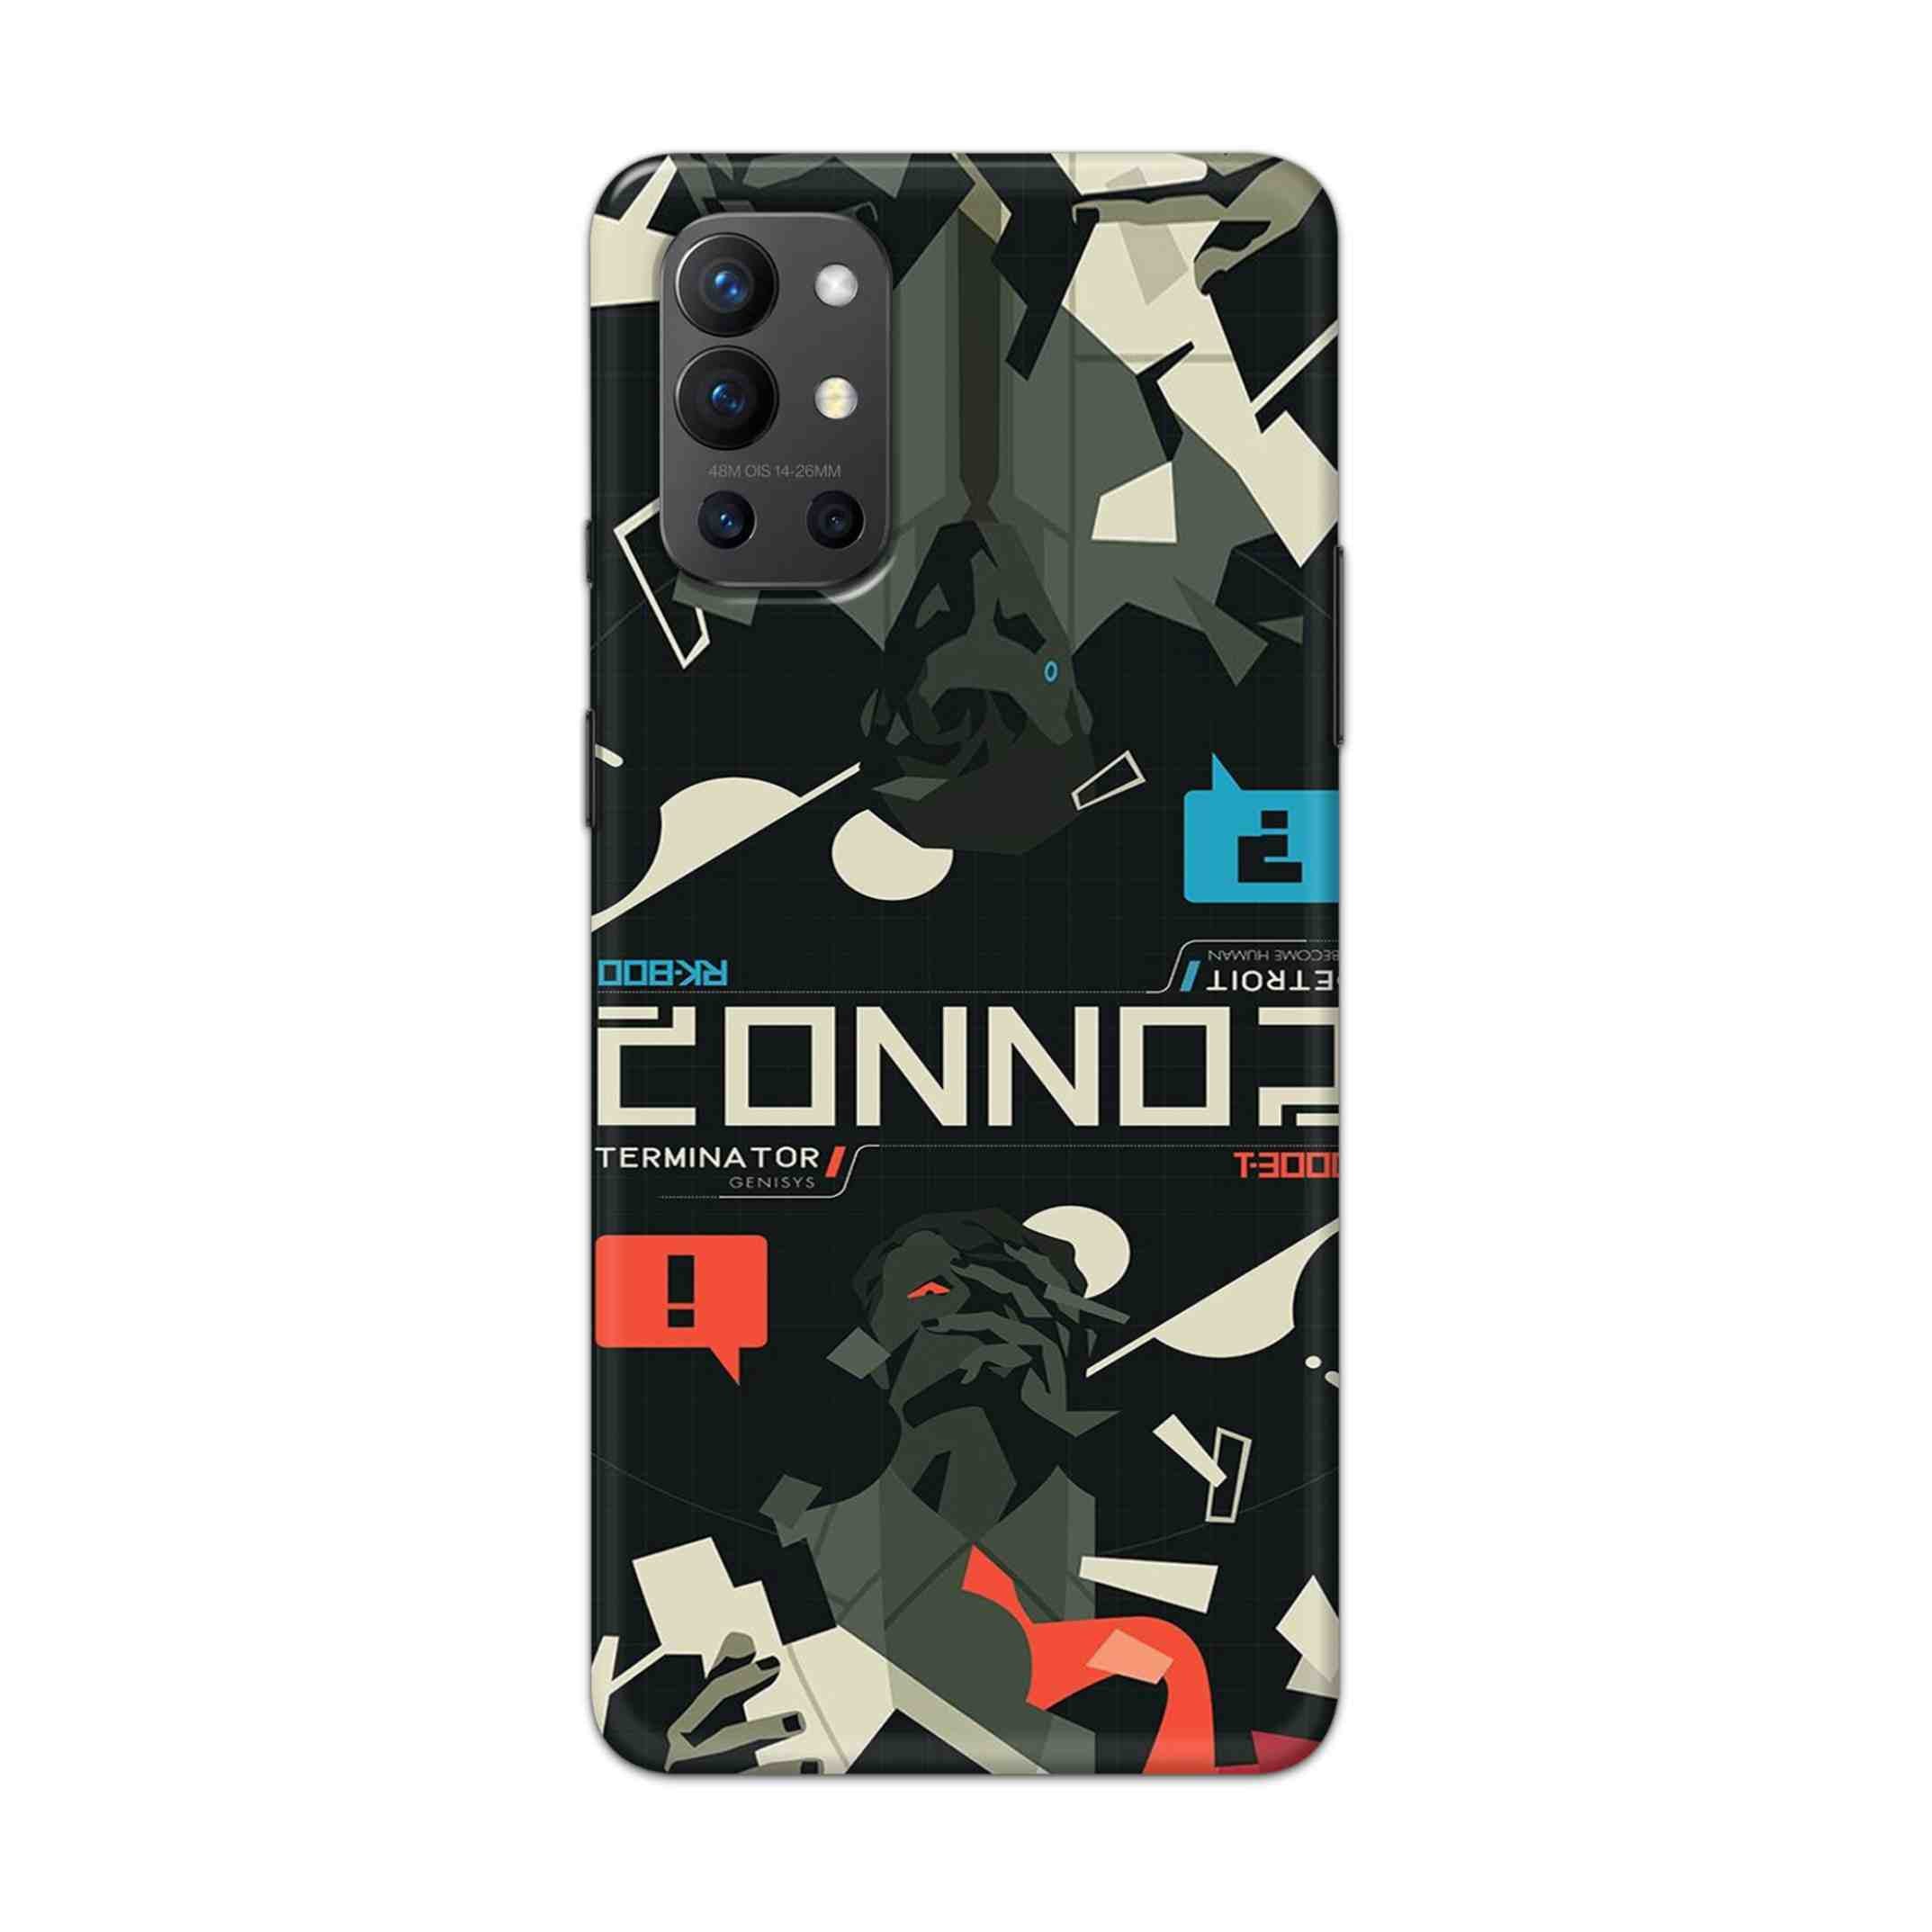 Buy Terminator Hard Back Mobile Phone Case Cover For OnePlus 9R / 8T Online